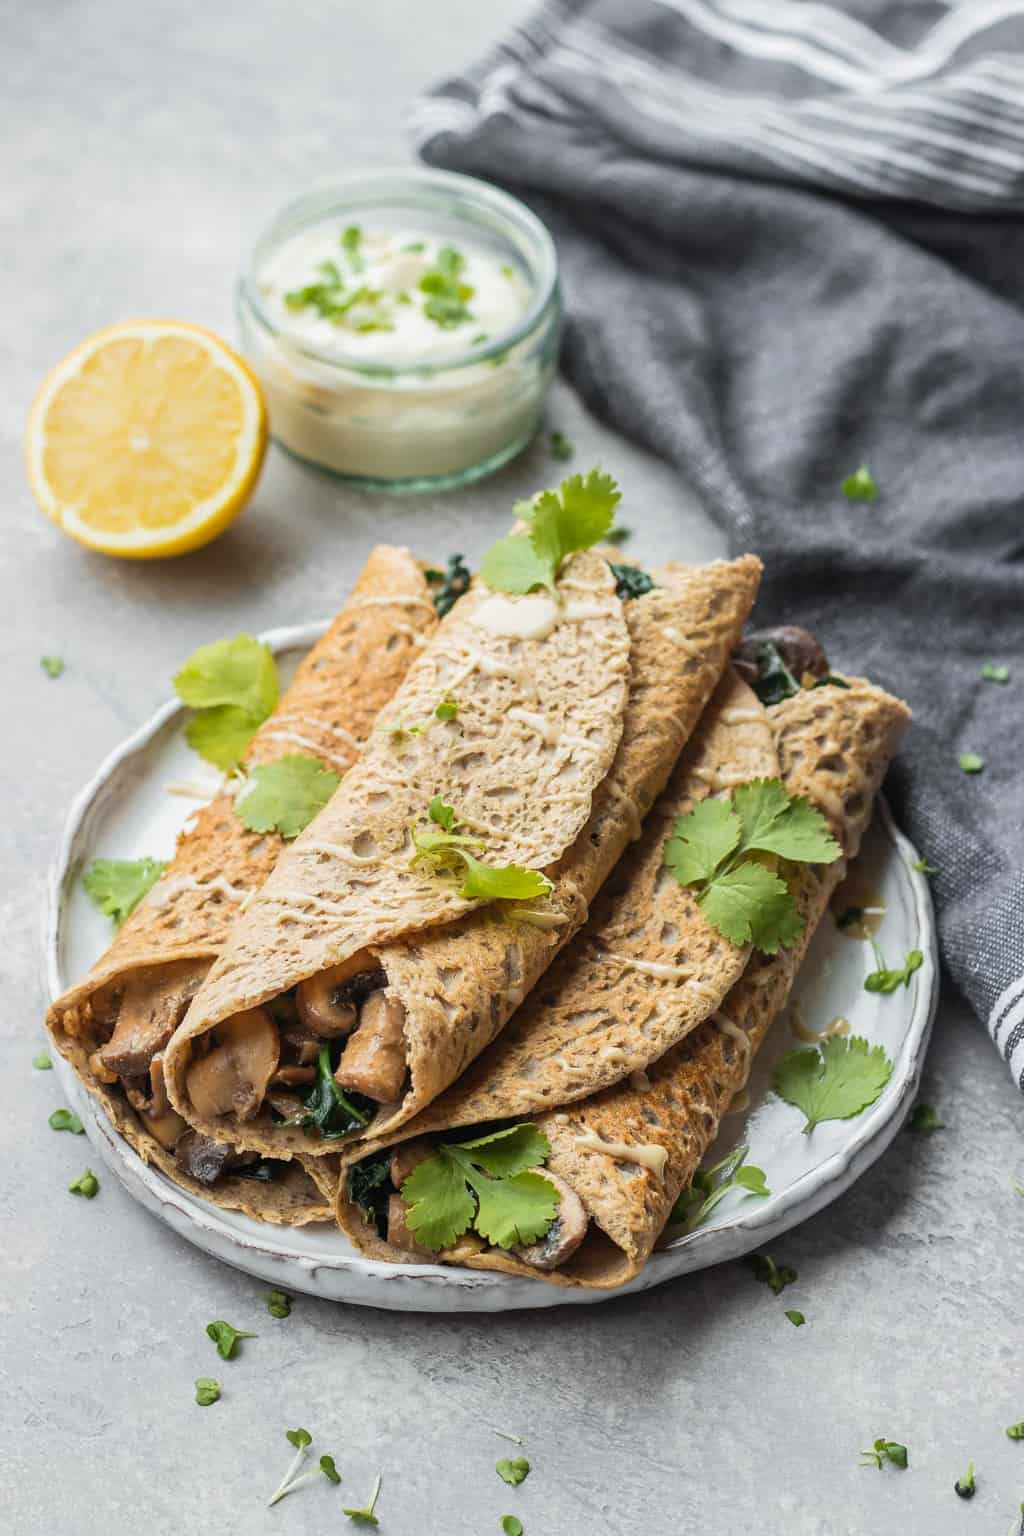 Savoury crepes with mushrooms and kale vegan gluten-free